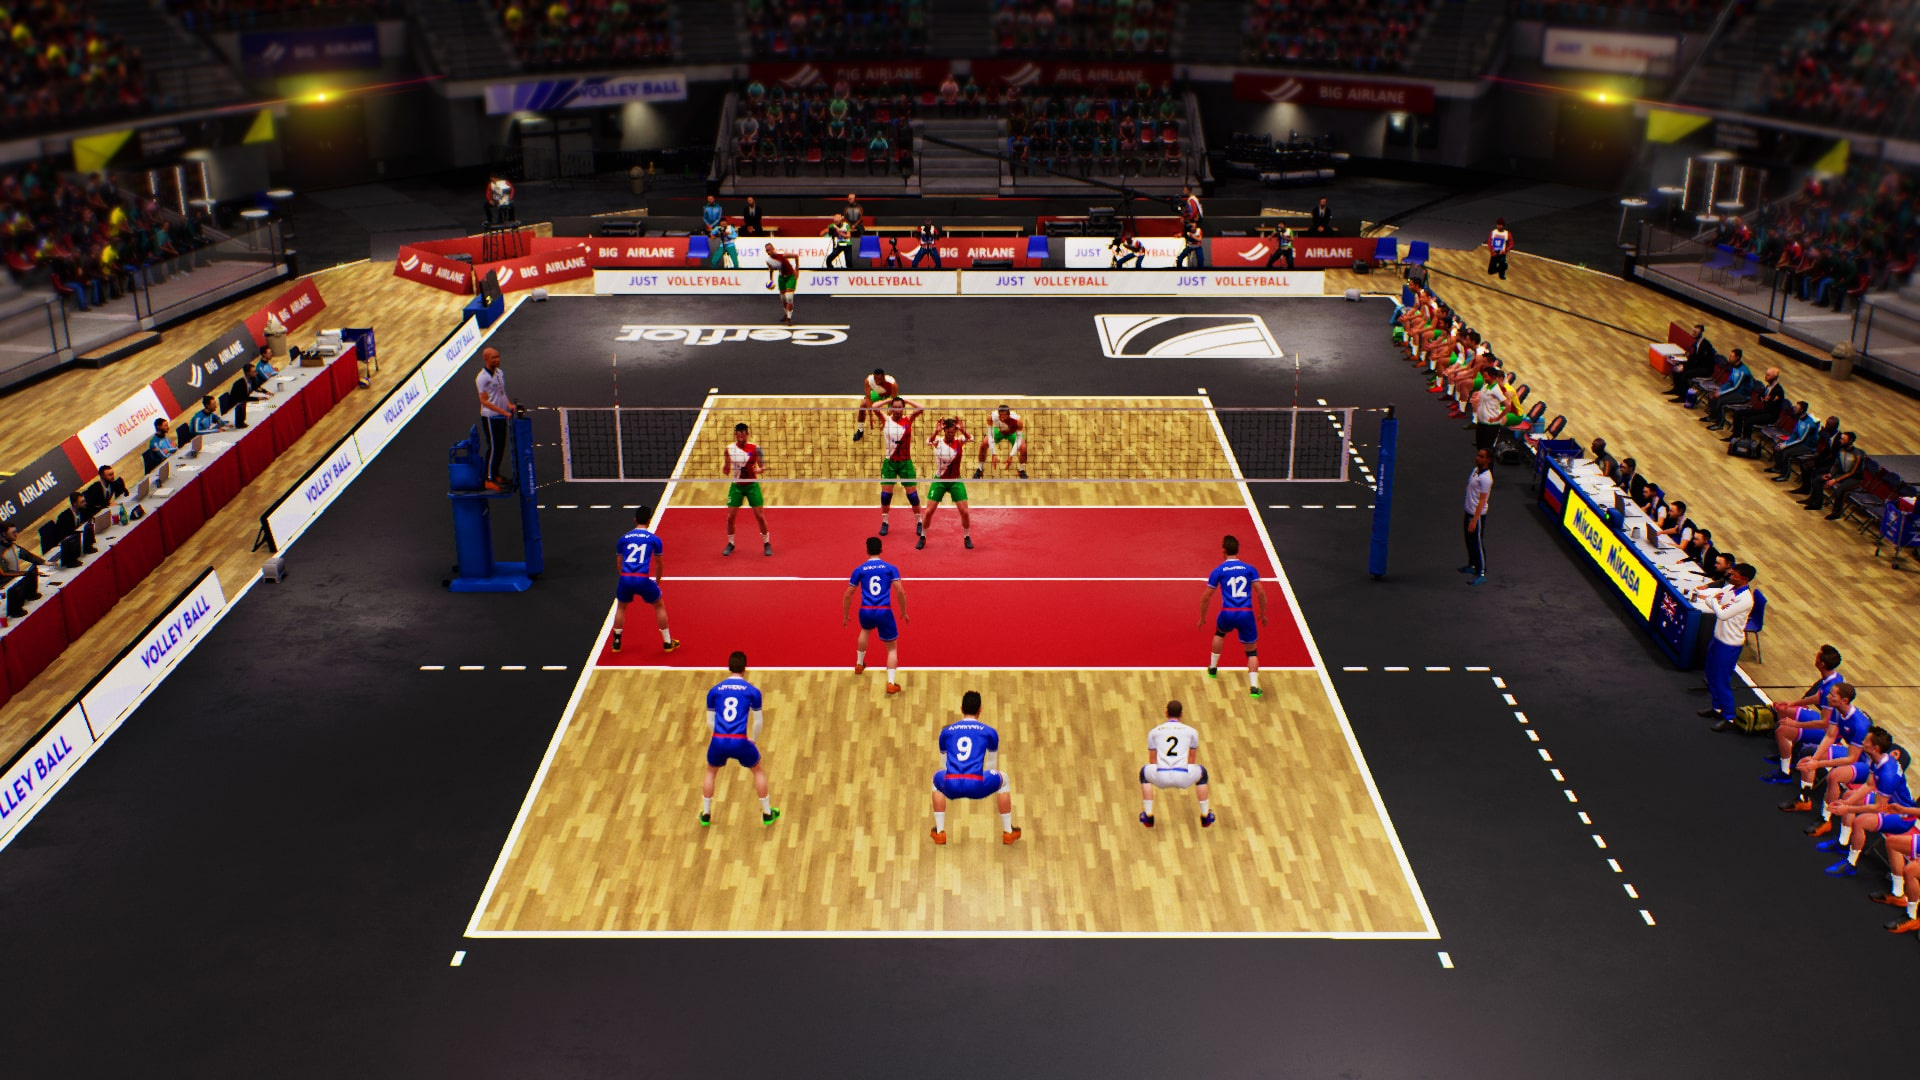 Spike Volleyball (PS4 / PlayStation 4) Game Profile | News, Reviews